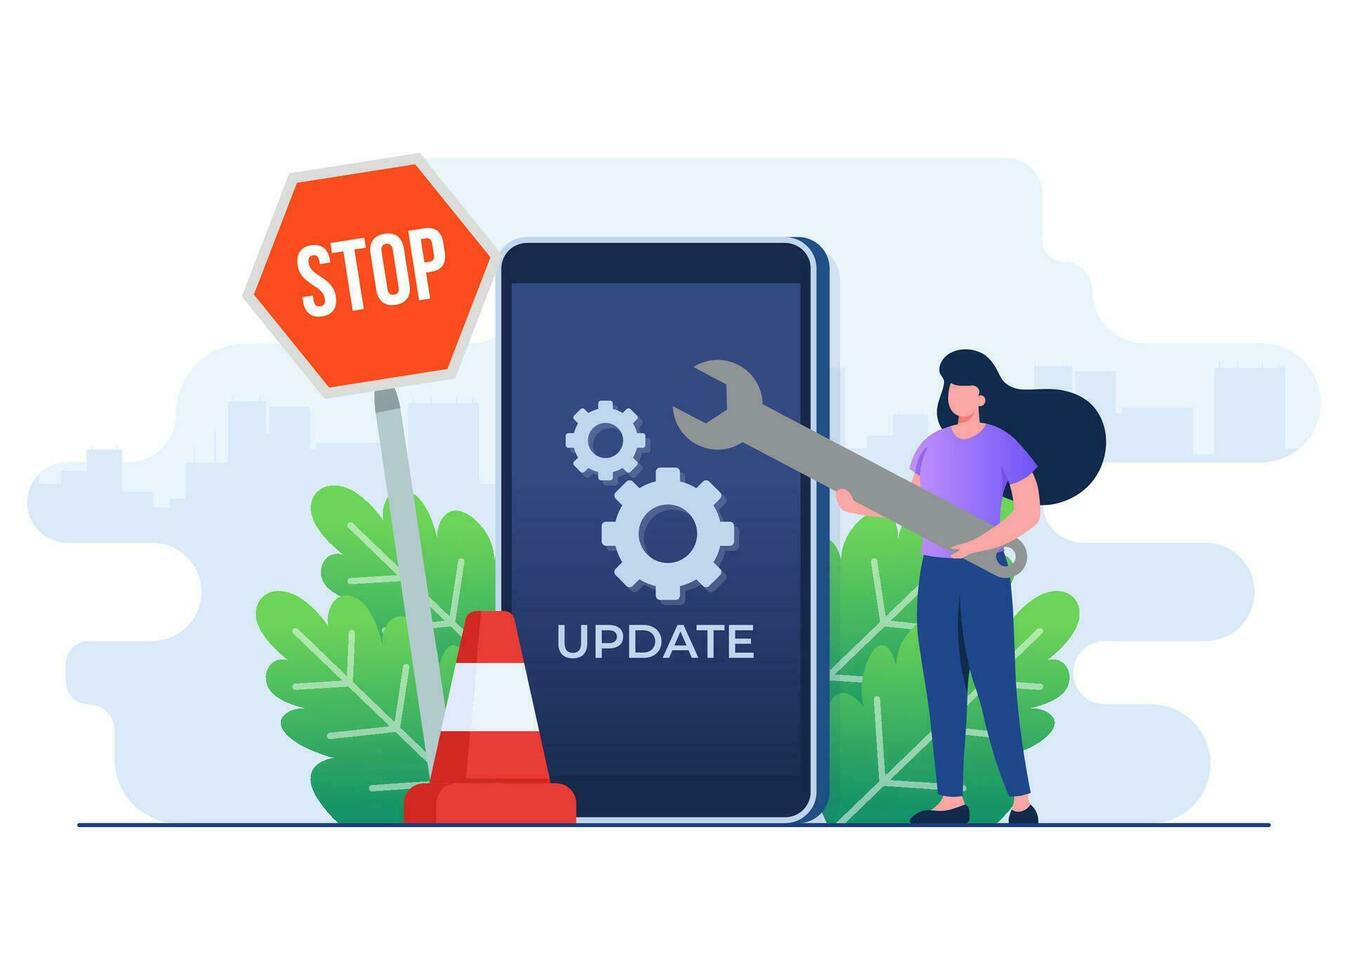 System maintenance, Error, Fixing trouble, Device updating, Software system under maintenance vector illustration, Software upgrade process on smartphone, System update, People update operation system